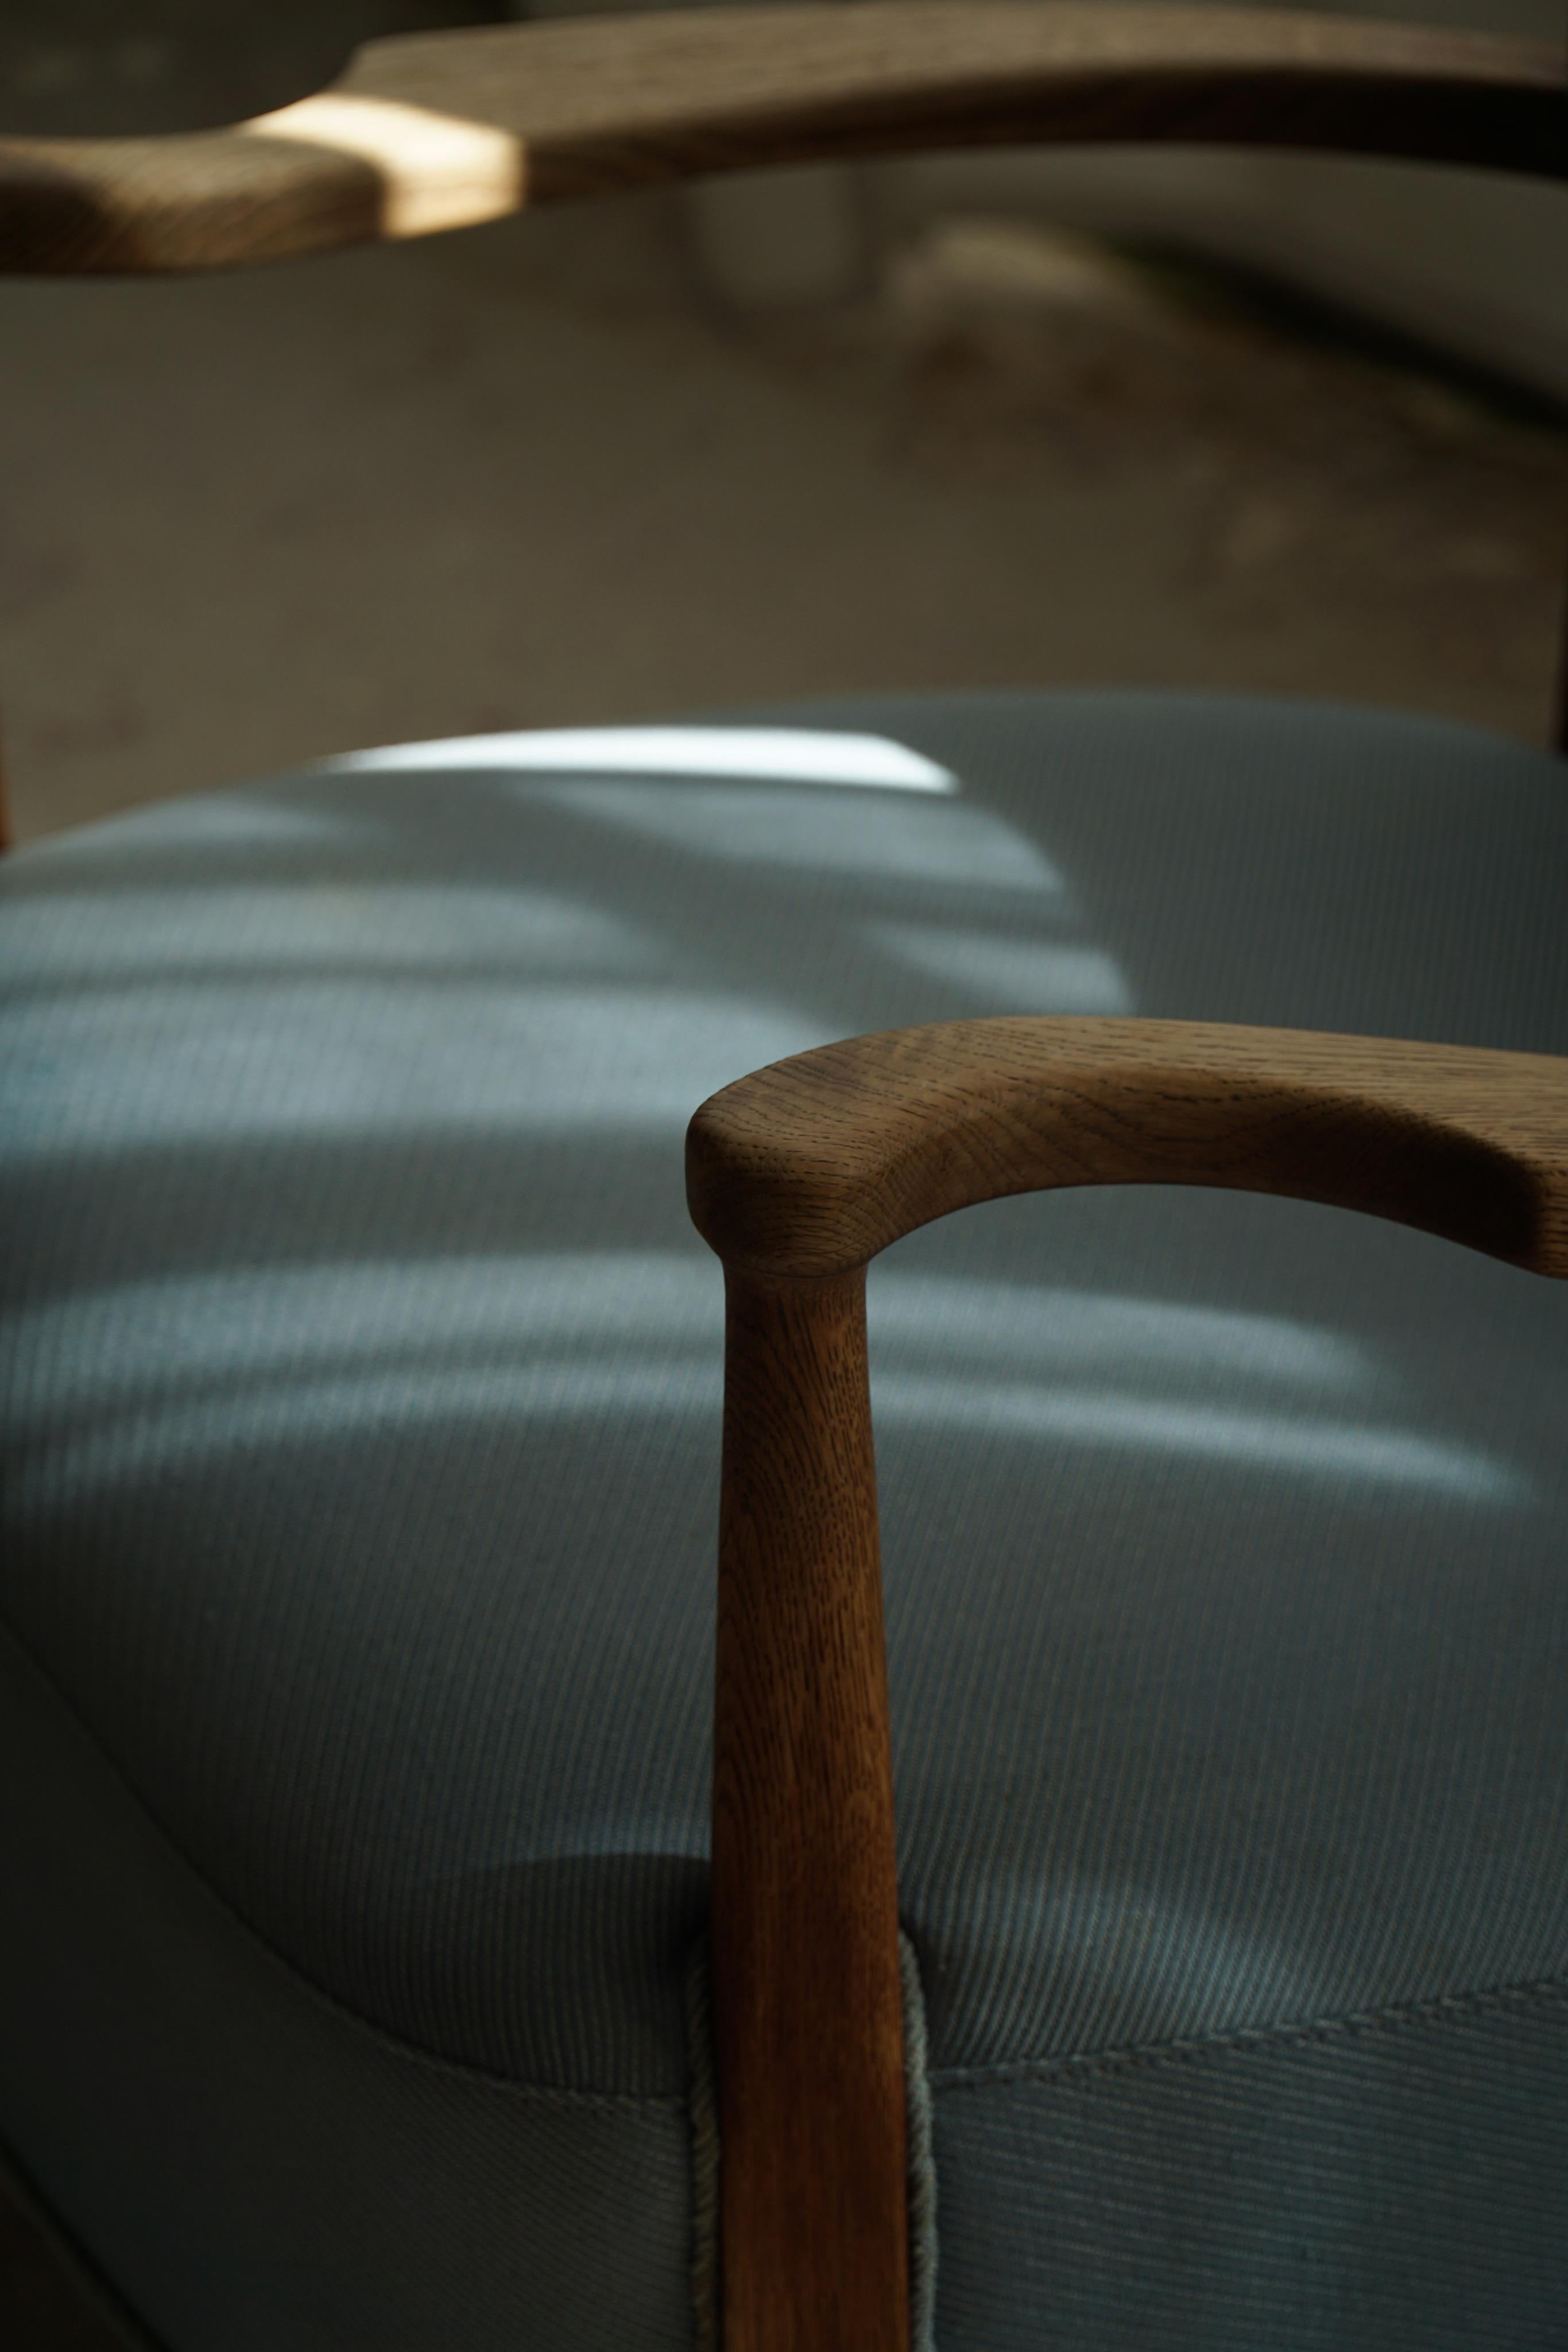 Danish Modern, Curved Lounge Chair in Oak, Attributed to Viggo Boesen, 1950s For Sale 1